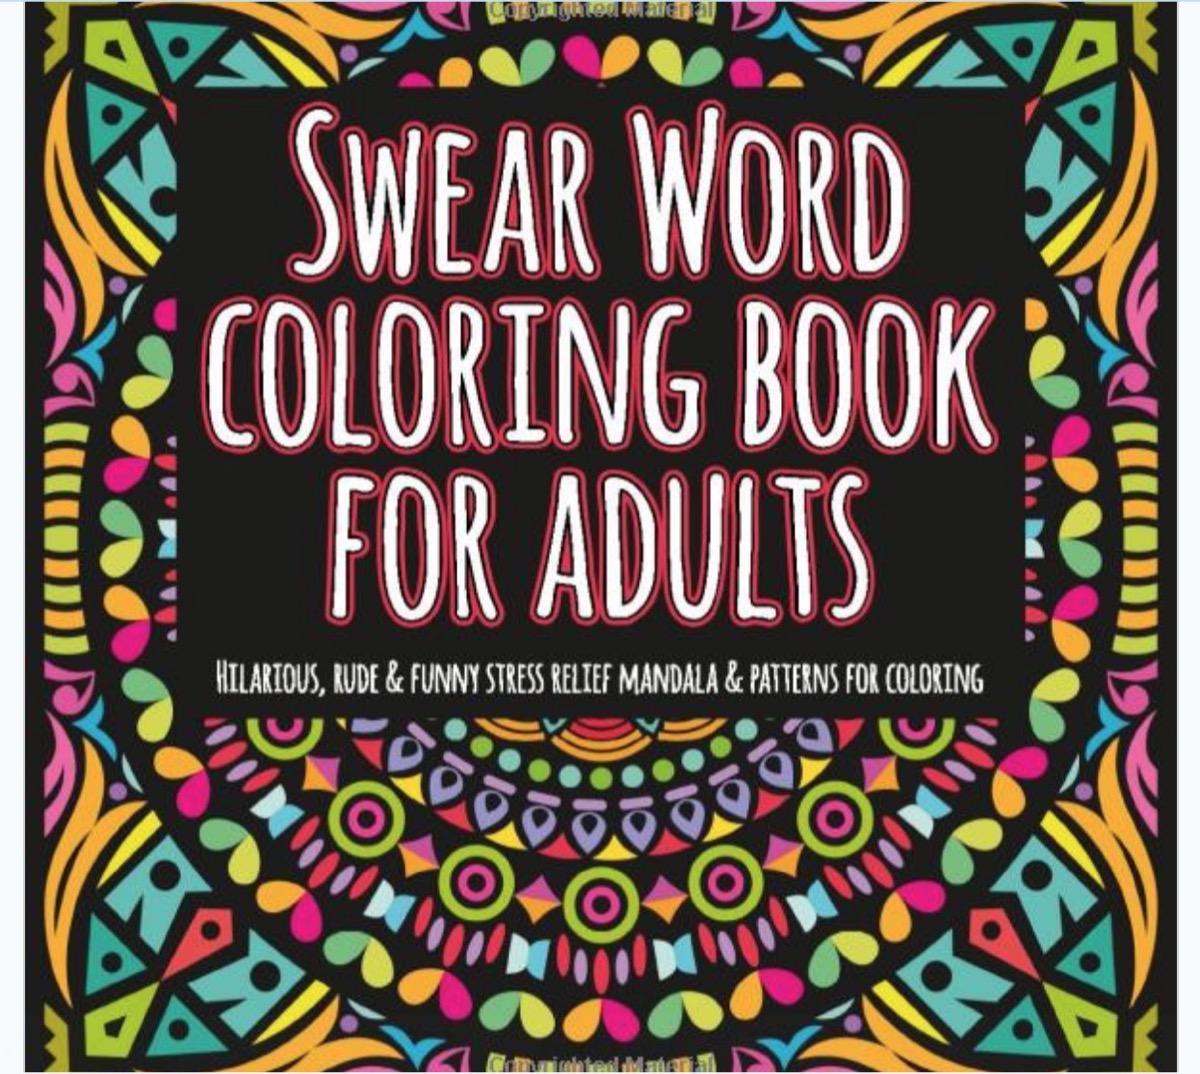 swear word coloring book, relaxation gifts